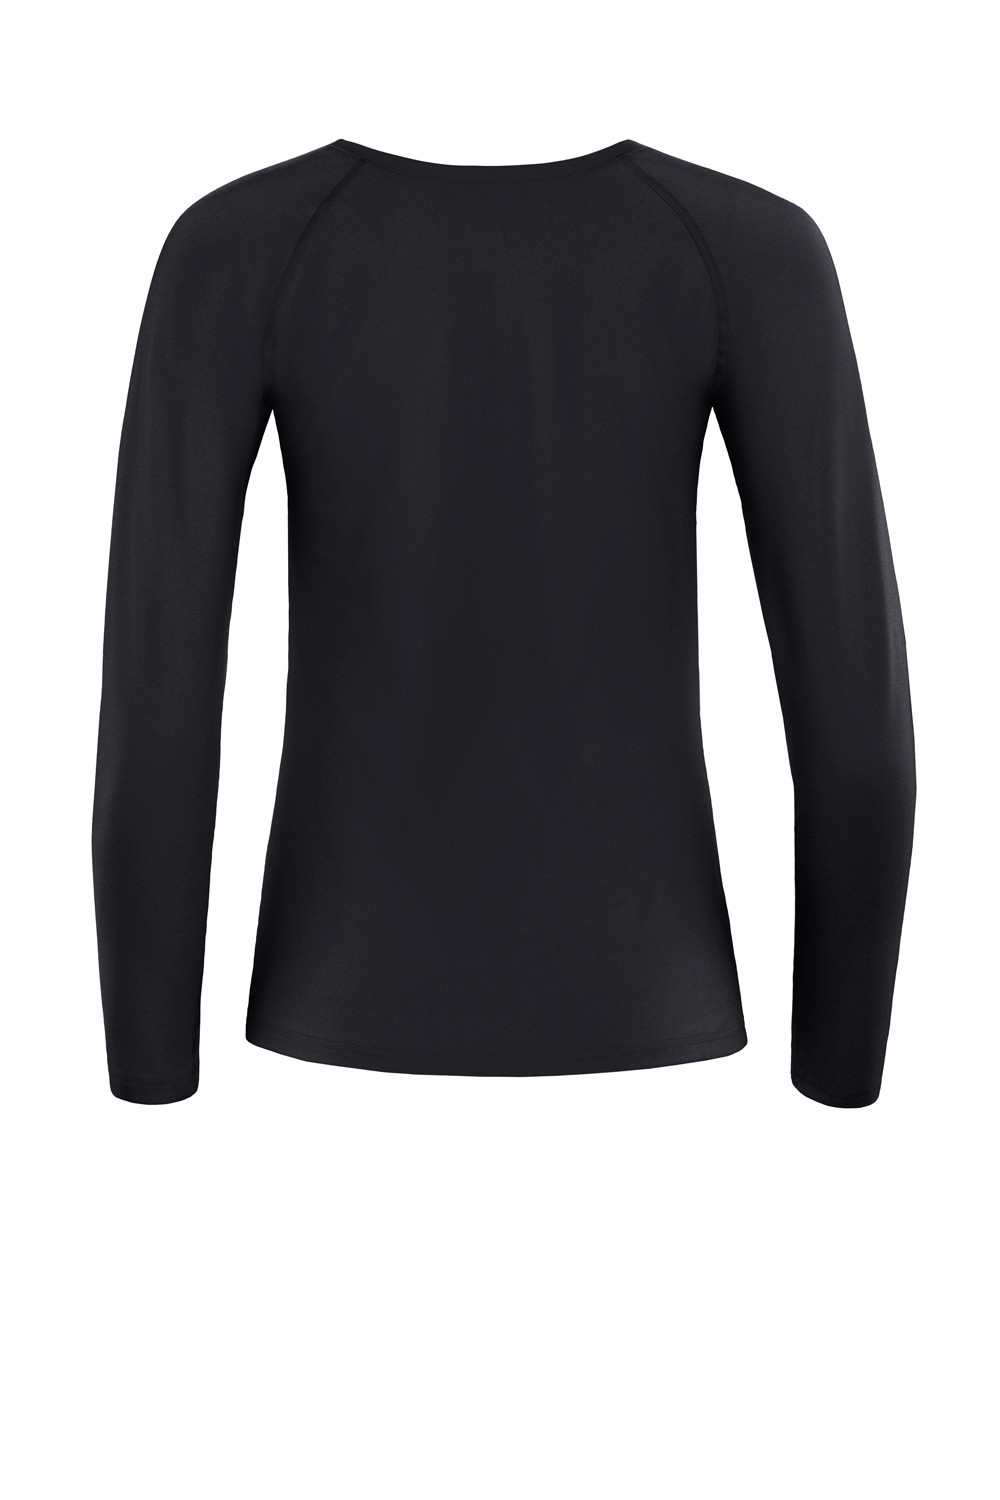 Functional Light and Soft Long Sleeve Top AET118LS, schwarz, Winshape Ultra  Soft Style